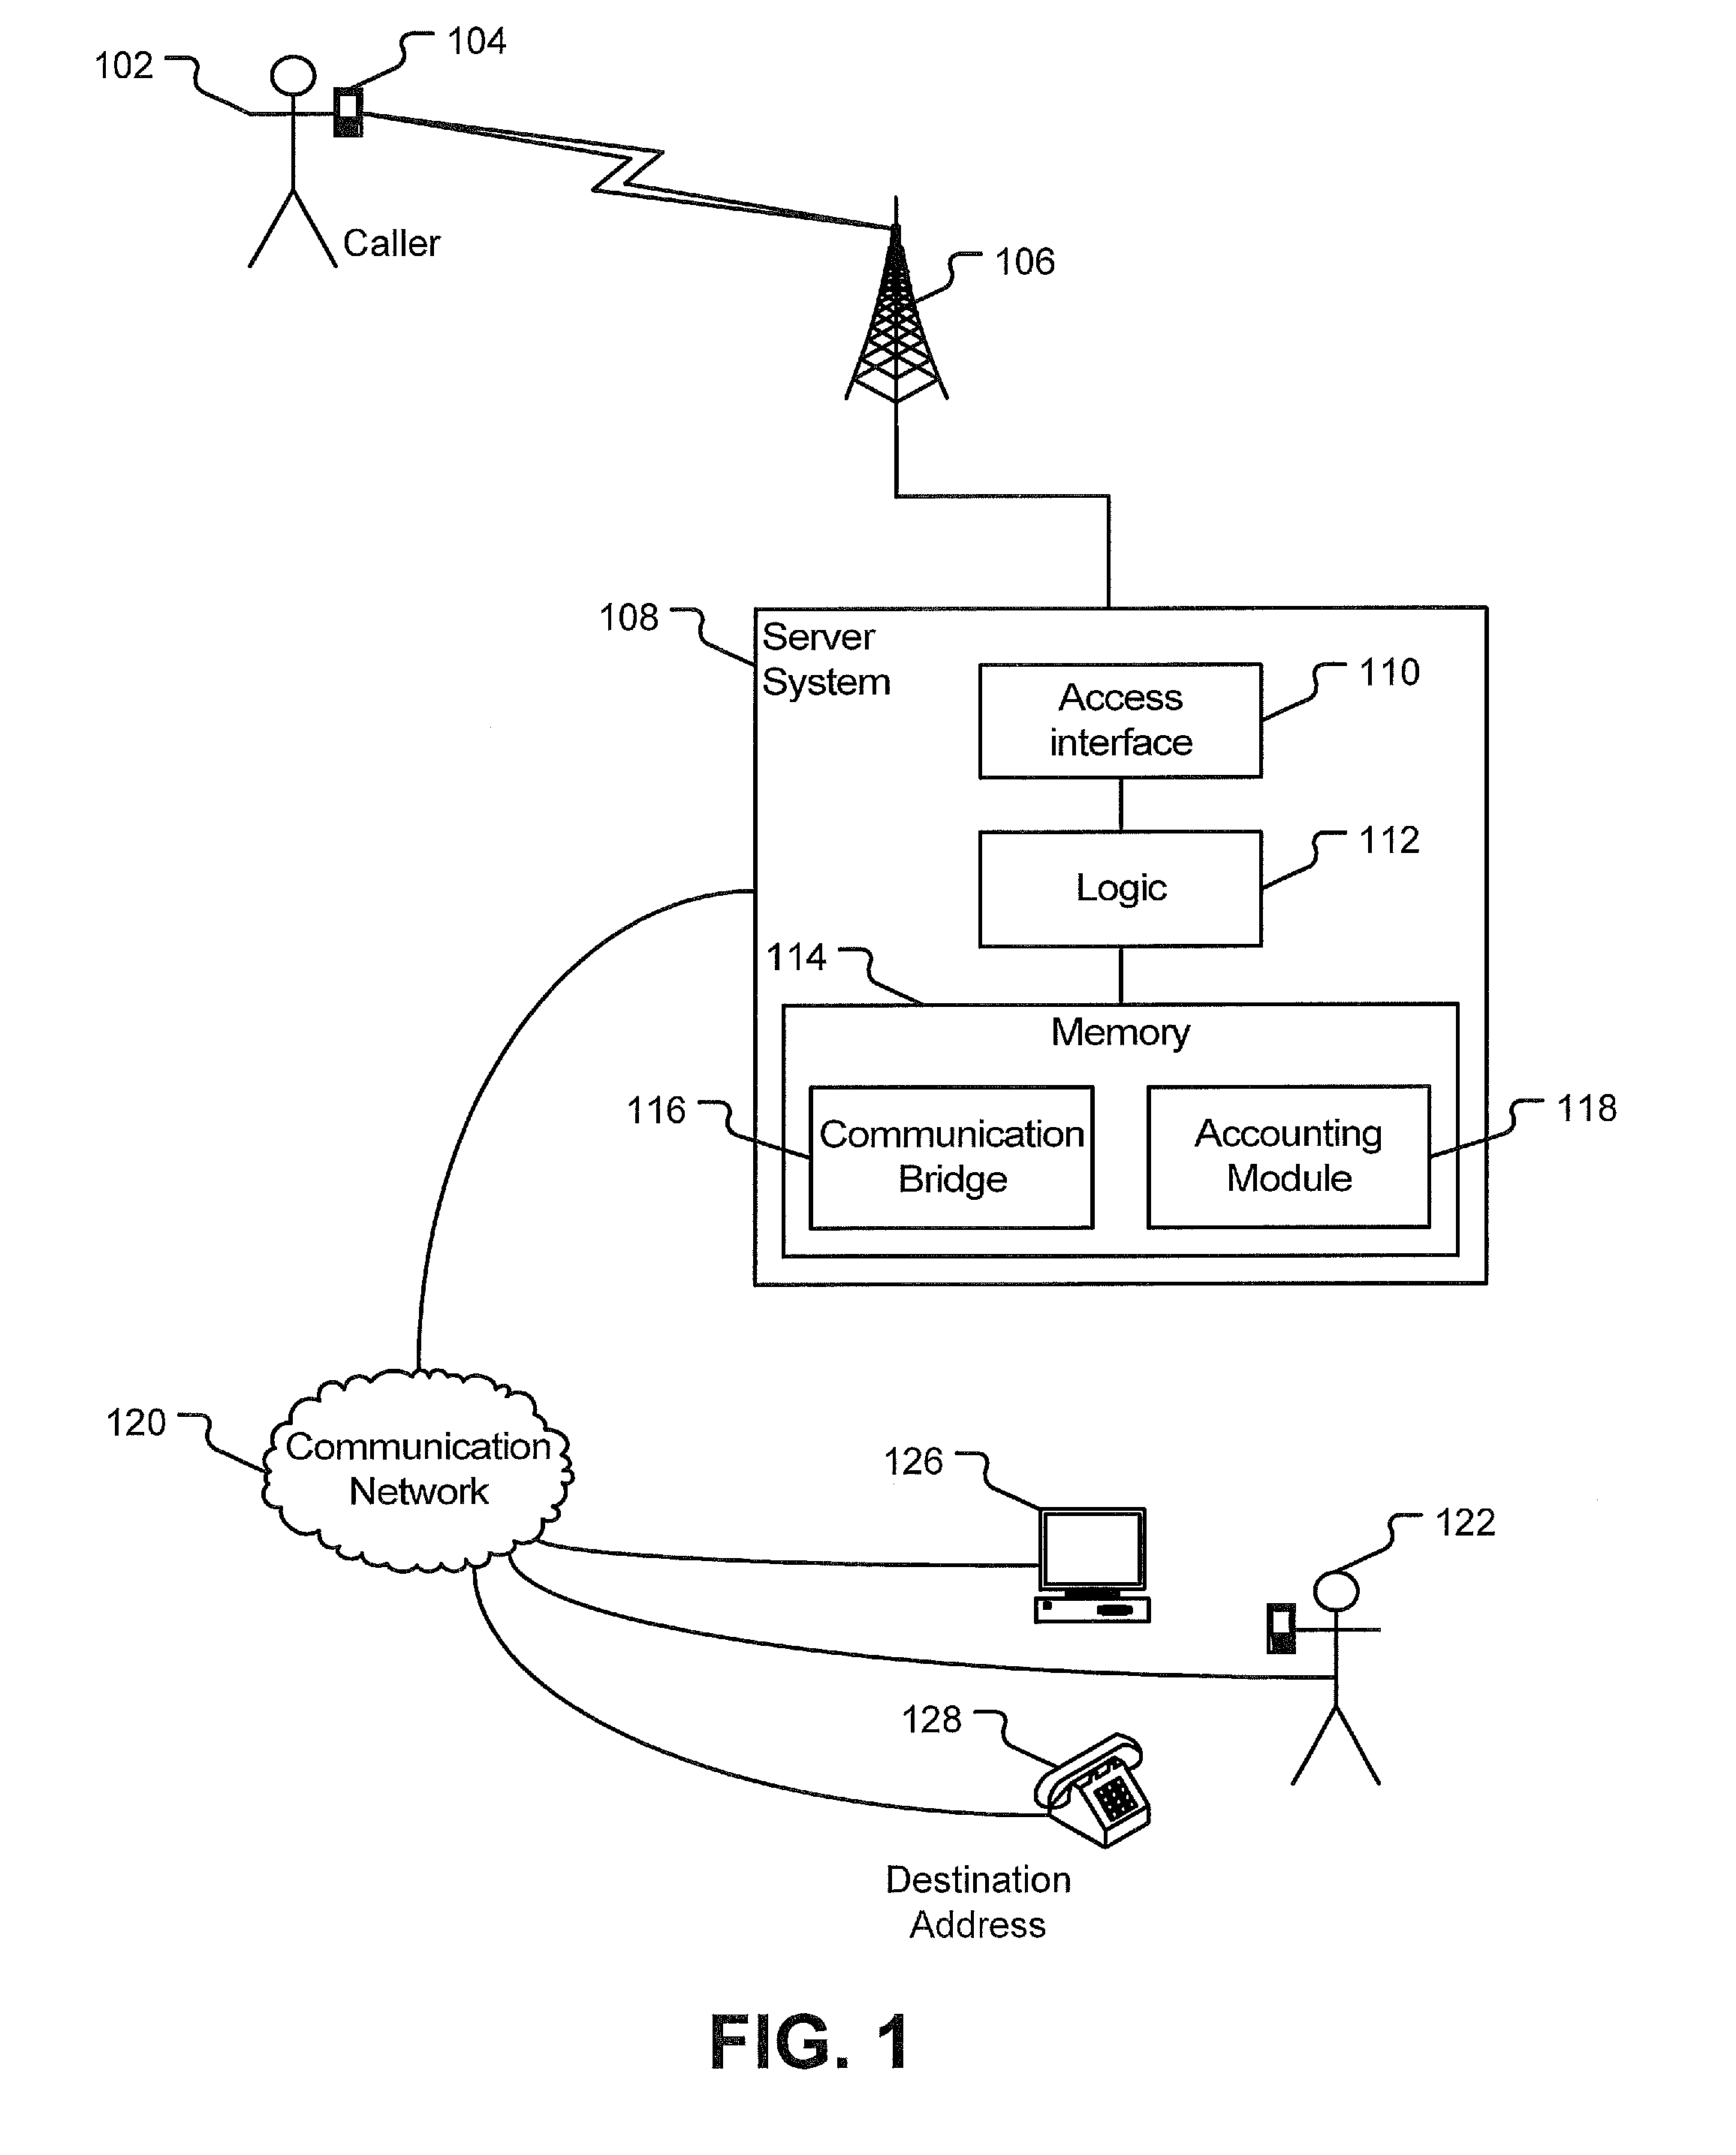 System and method of using a dynamic access number architecture